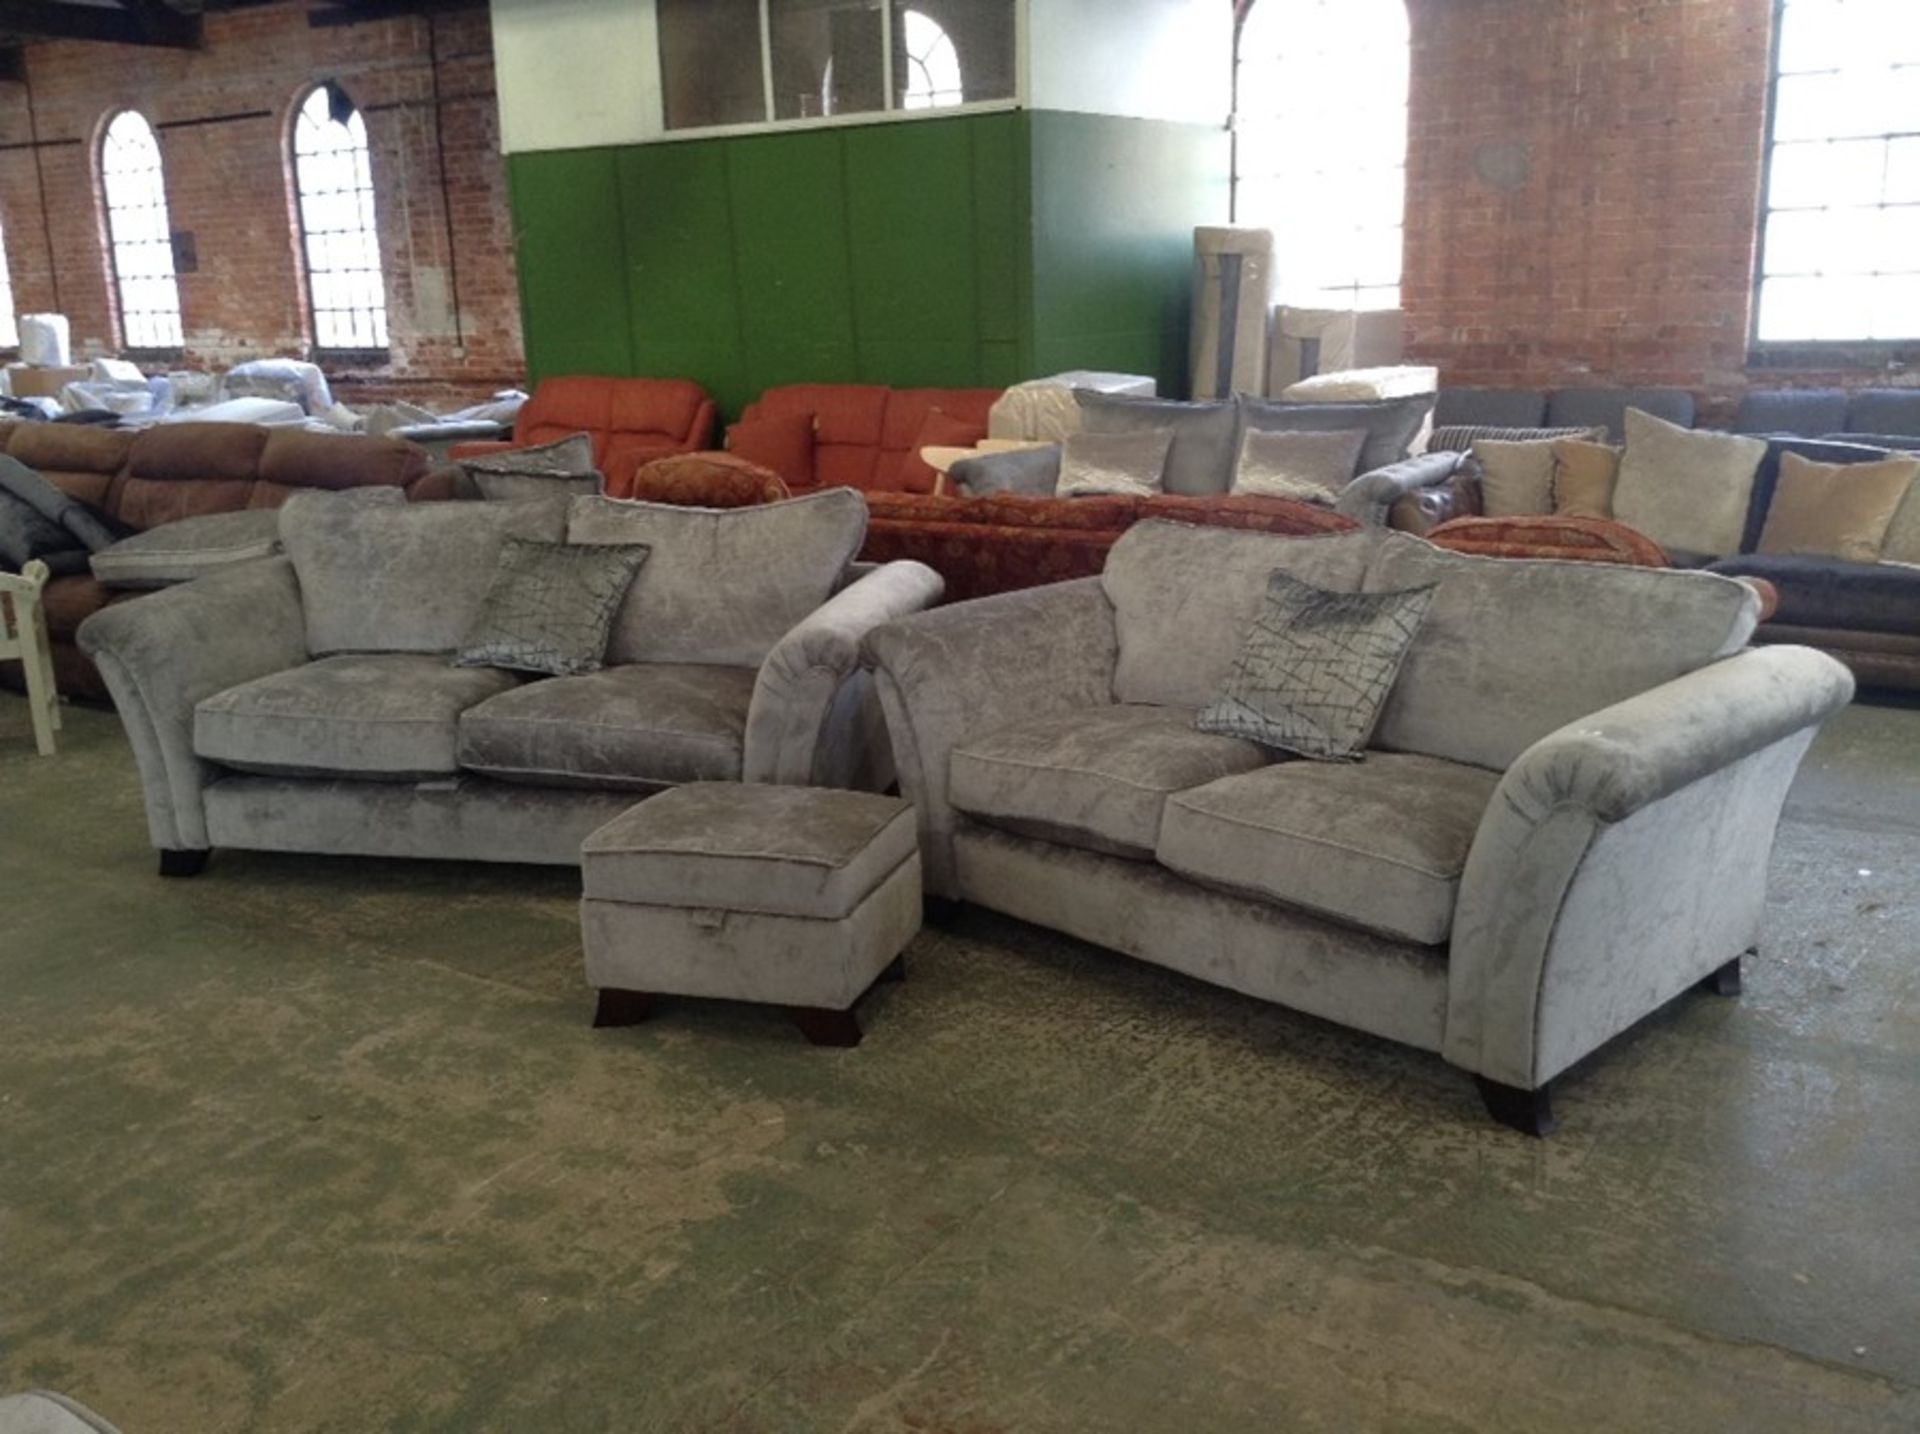 GREY PATTERNED 3 SEATER, 2 SEATER + STORAGE FOOTST